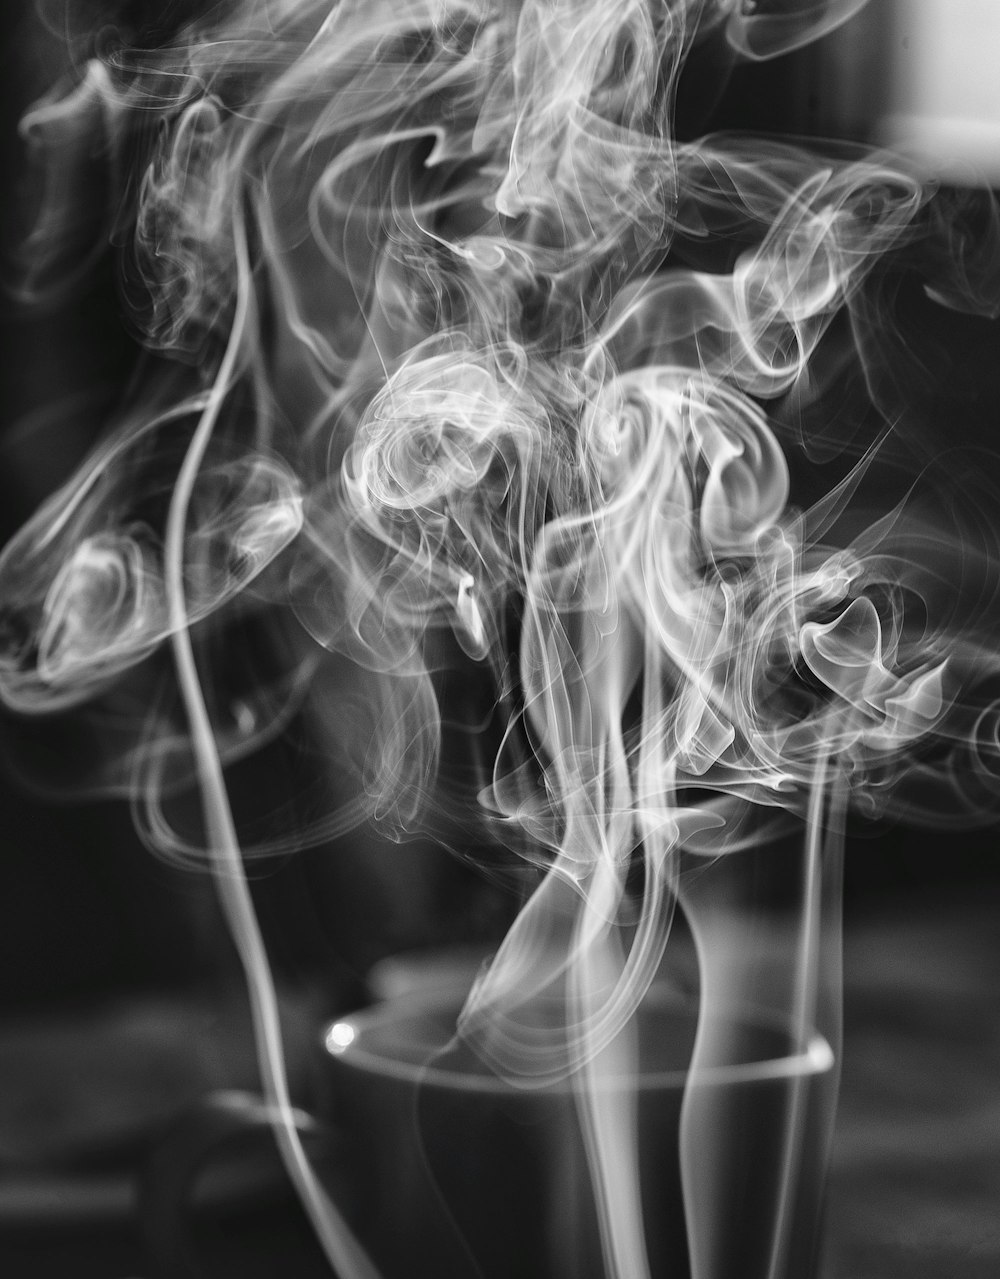 Grey Smoke Pictures | Download Free Images on Unsplash